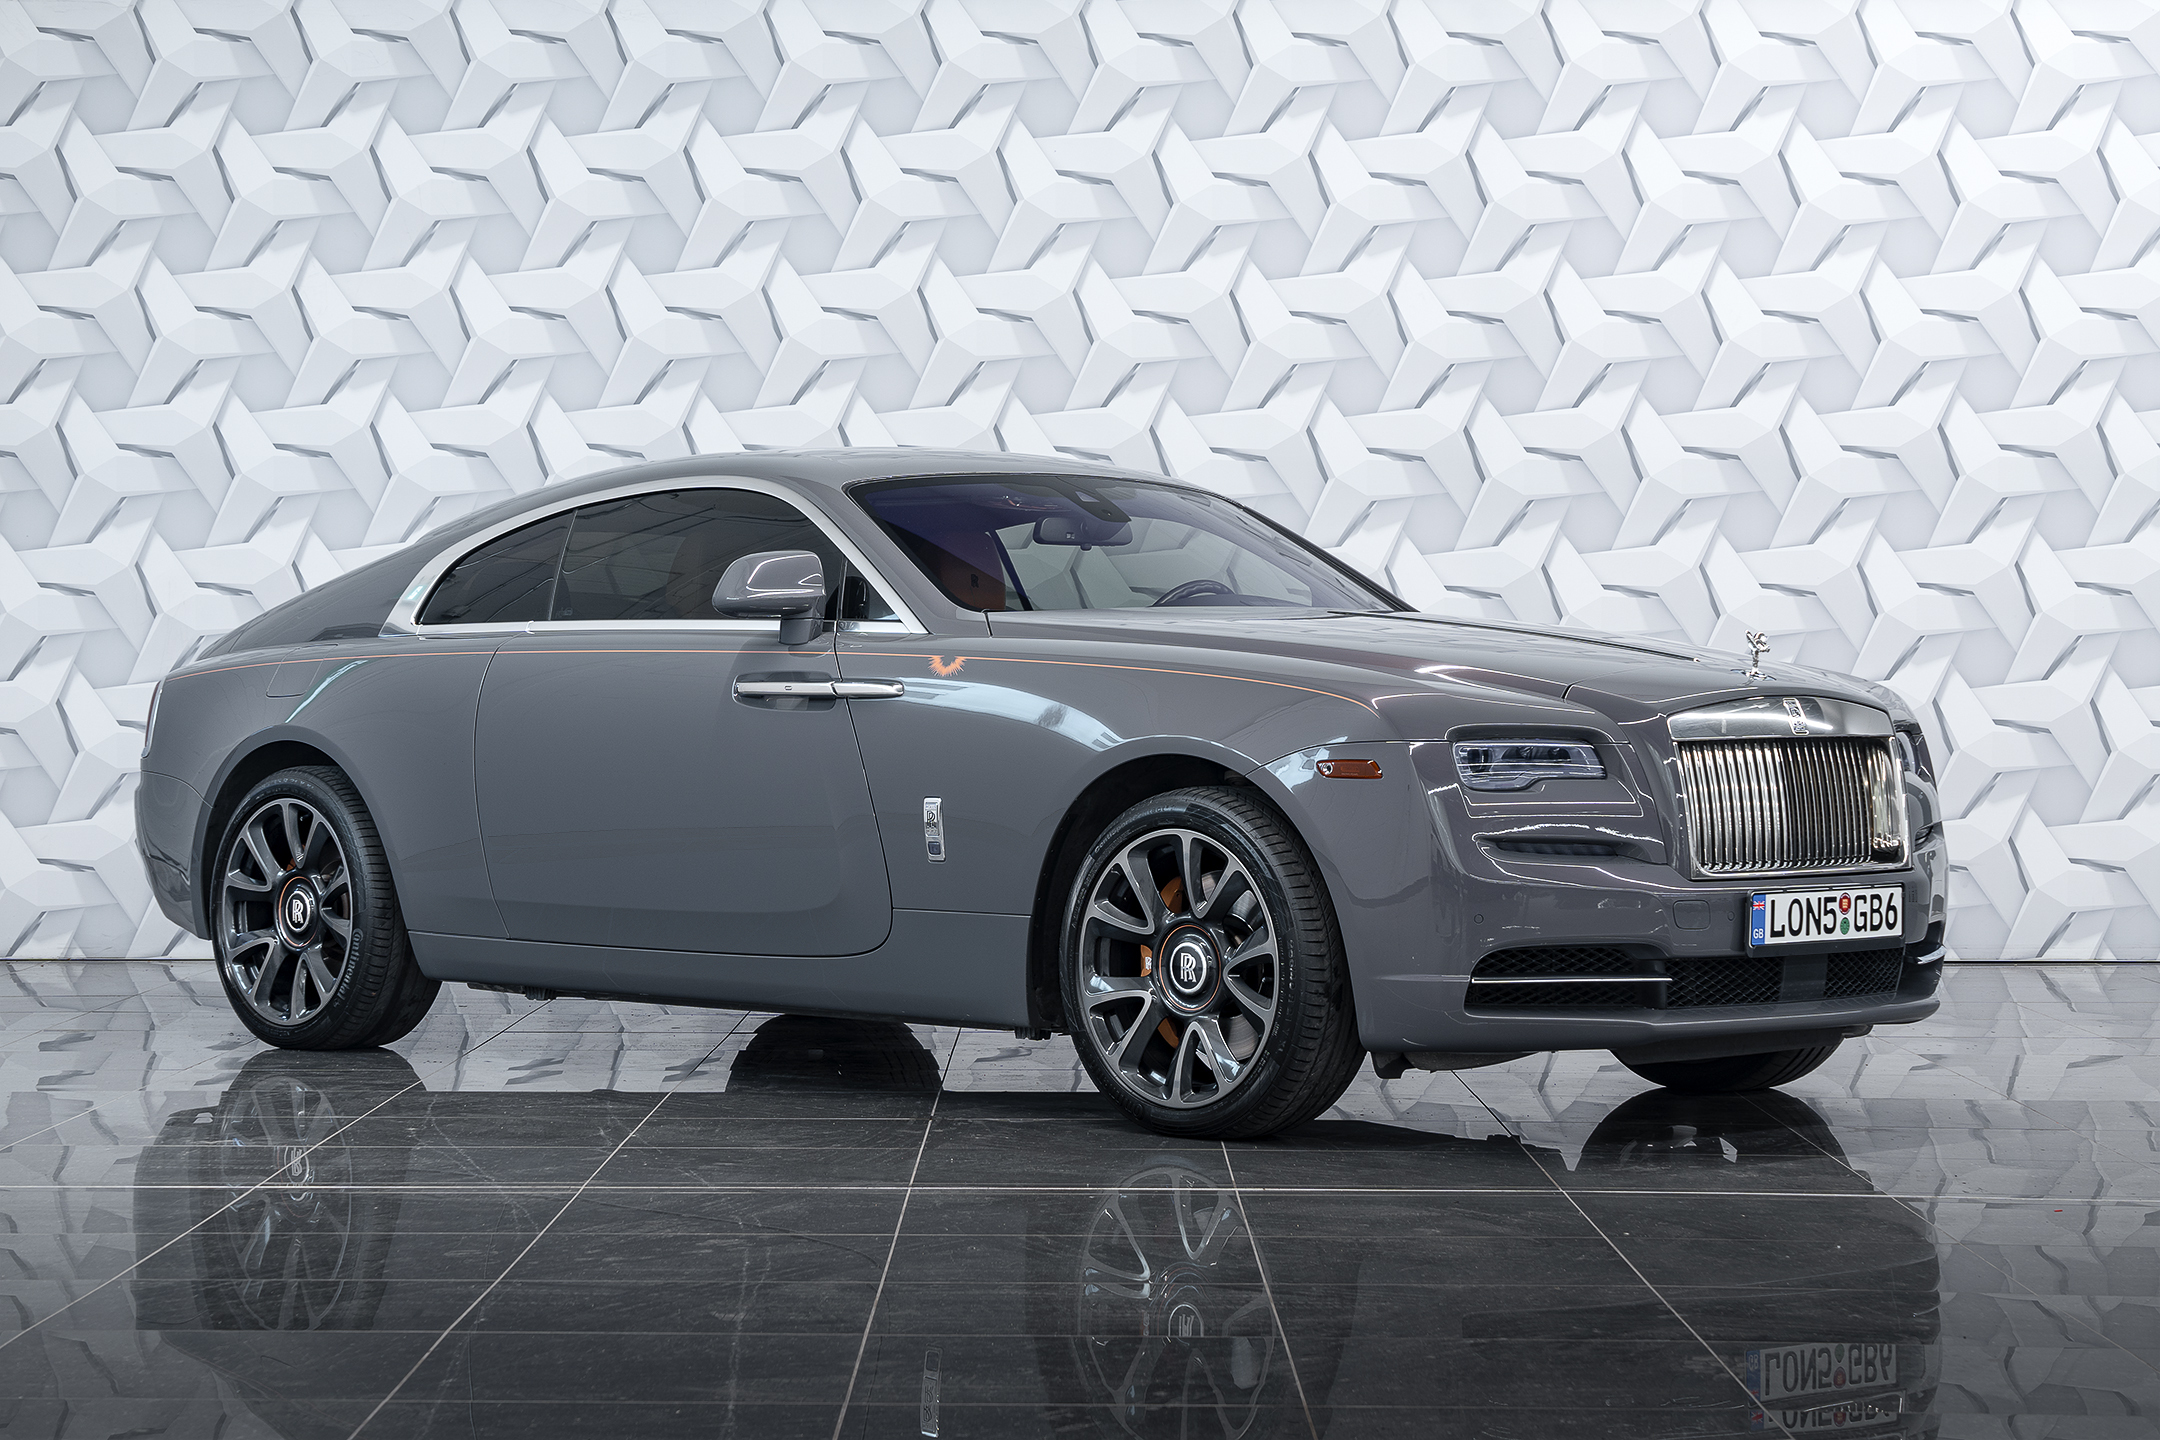 2018 Rolls-Royce Wraith Luminary limited collection 1 of 55